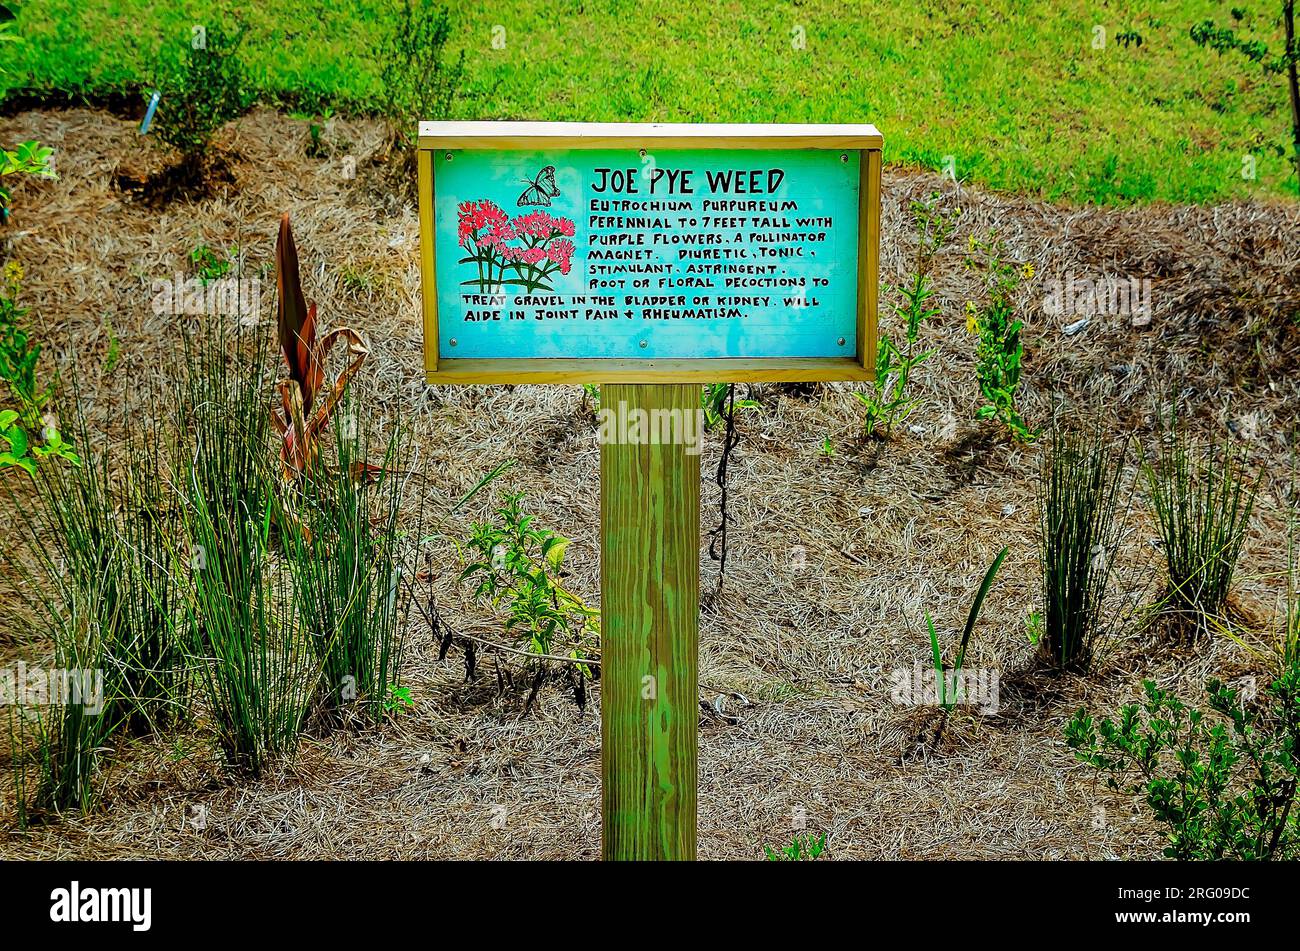 Joe Pye weed (Eutrochium purpureum) is planted in the bioswale at Africatown Heritage House, Aug. 5, 2023, in Mobile, Alabama. Stock Photo